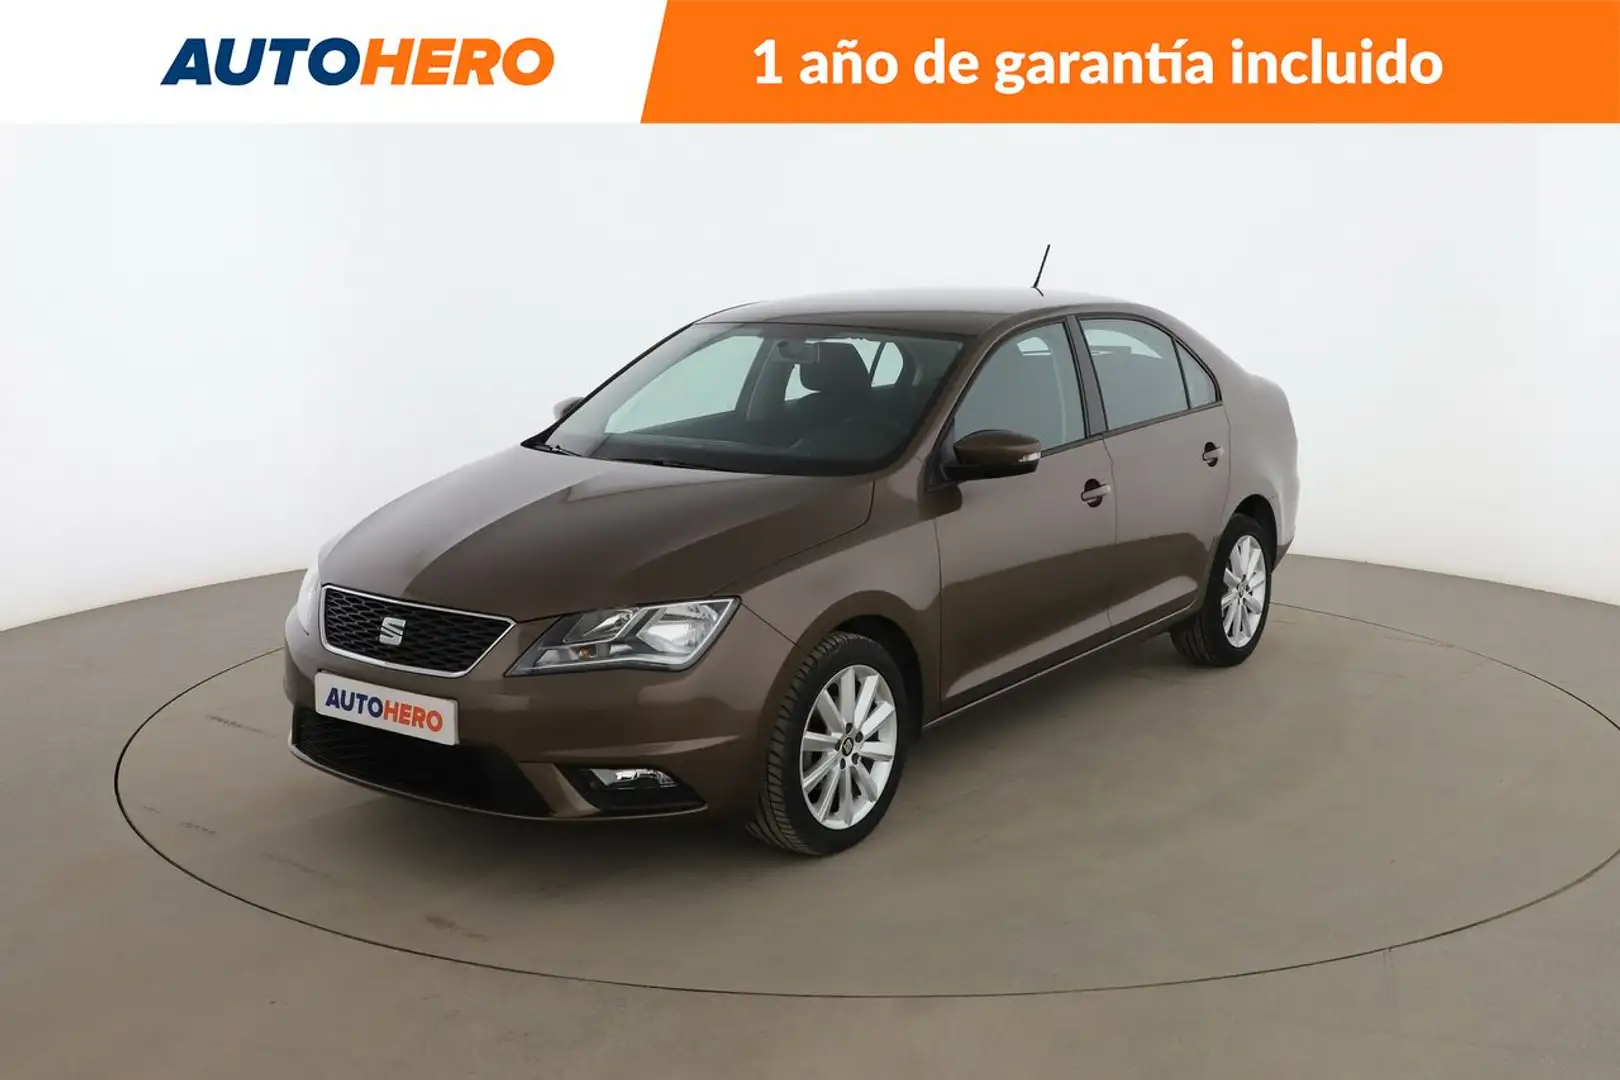 SEAT Toledo 1.0 EcoTSI S&S Reference Edition 95 - 1